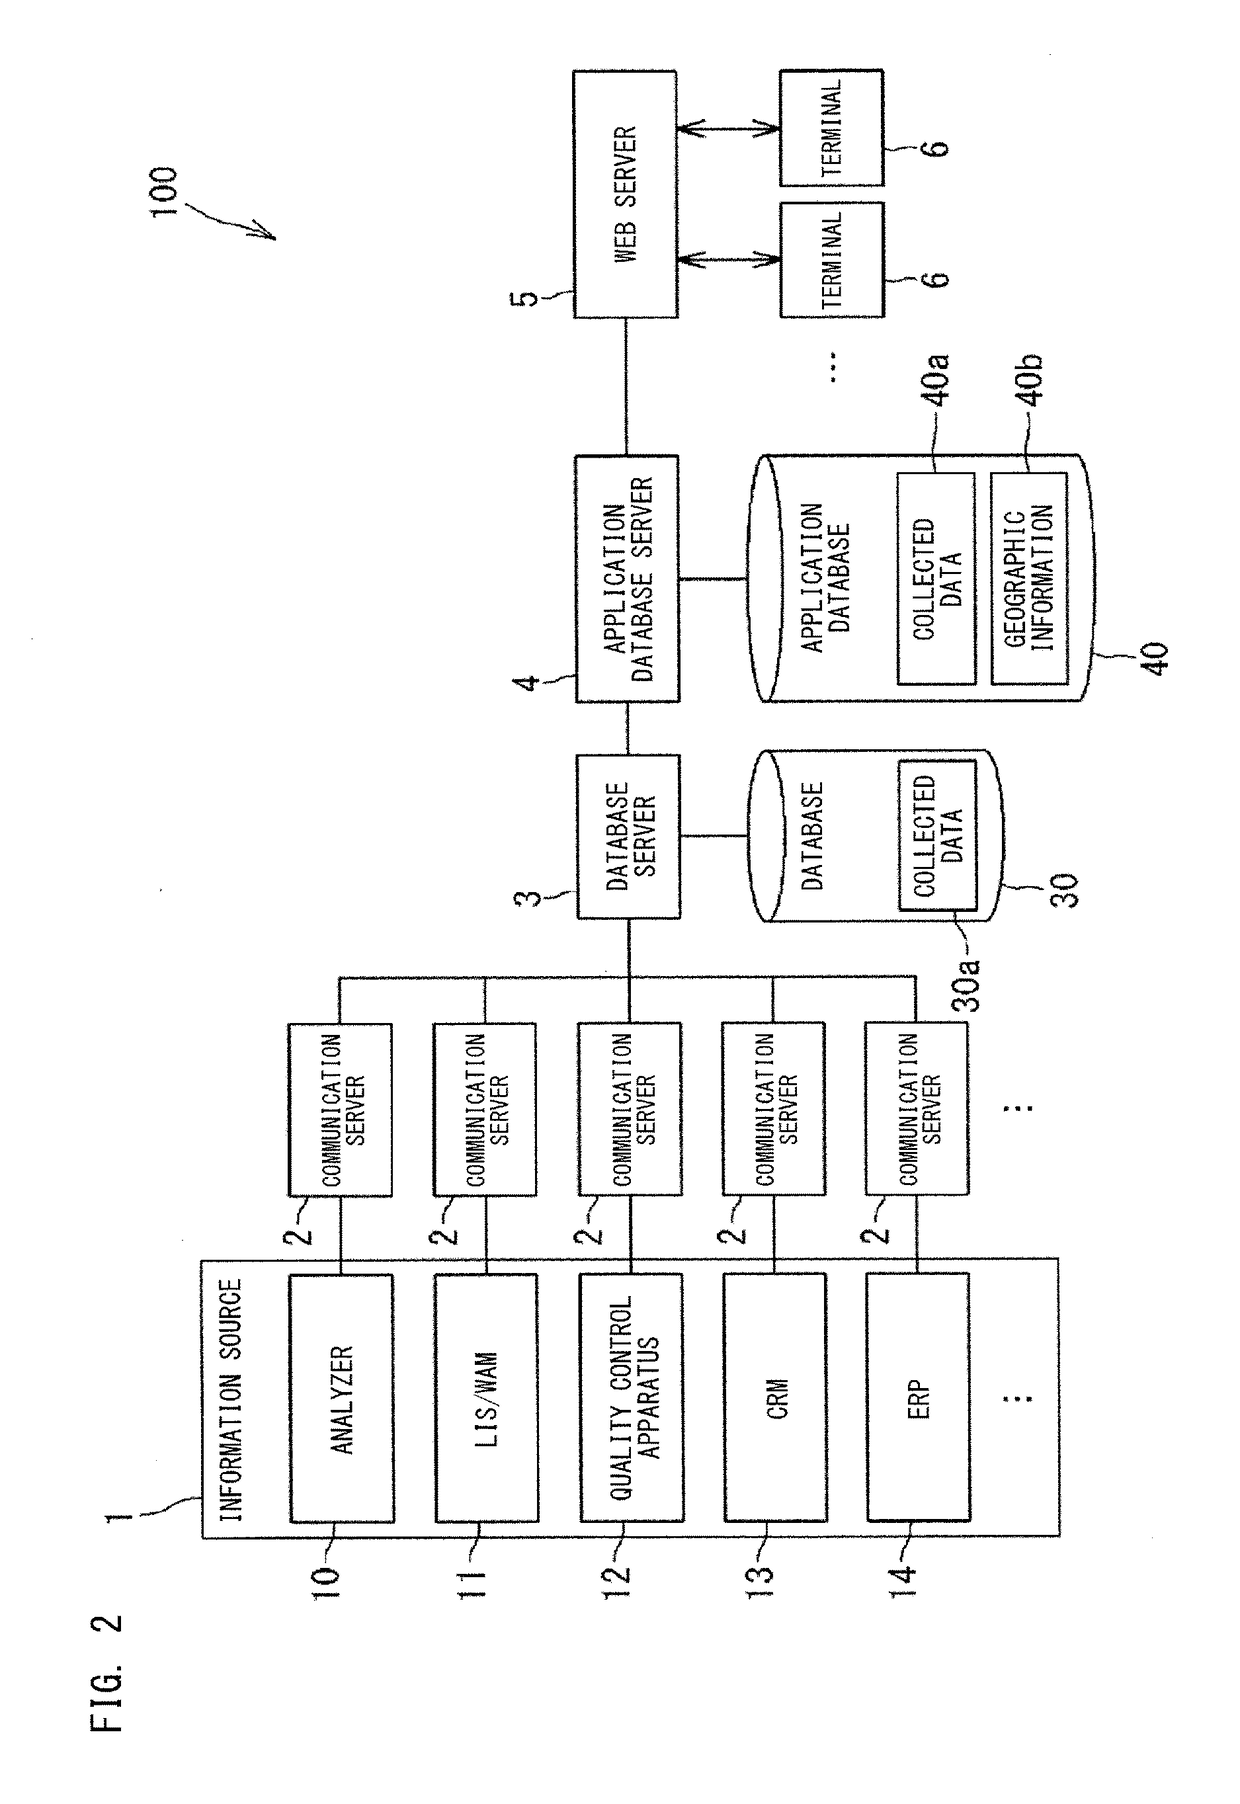 Information processing apparatus and method for clinical laboratory management